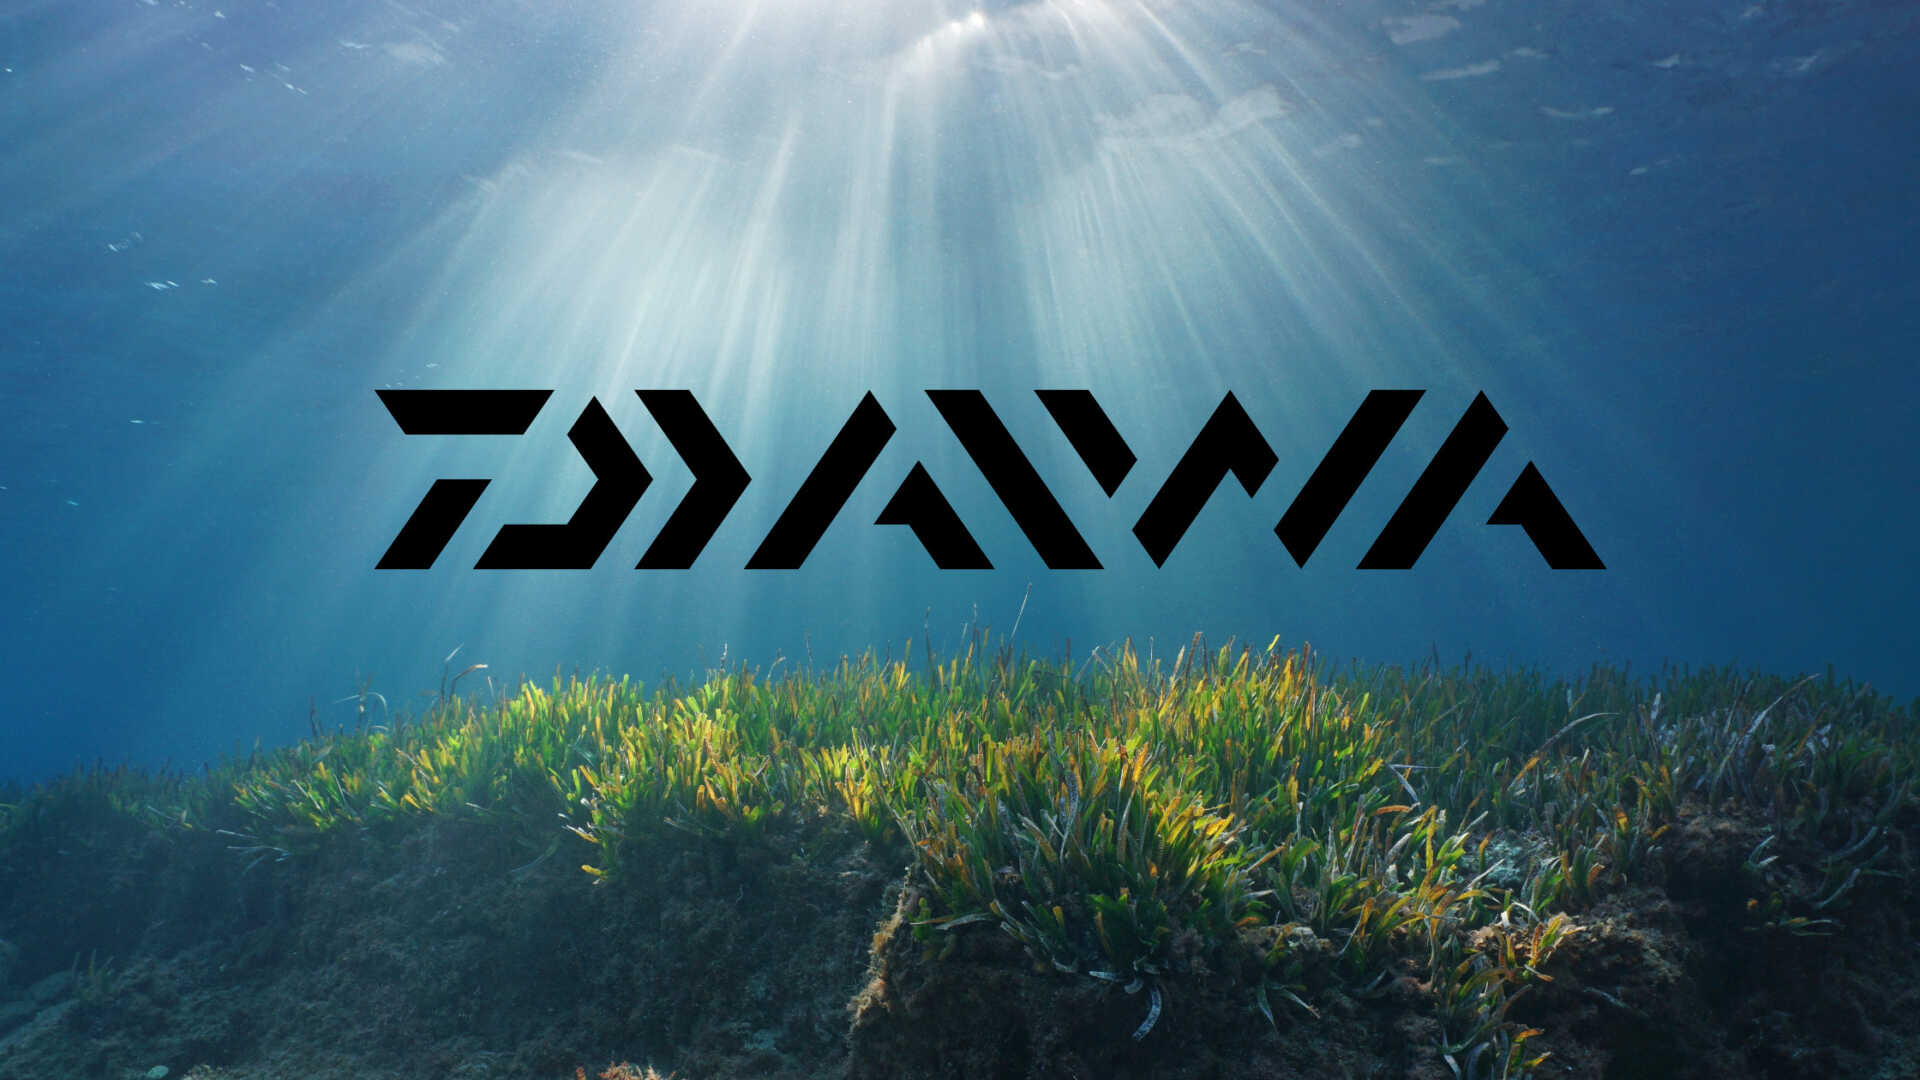 Daiwa dives in to support OzFish's Seeds for Snapper